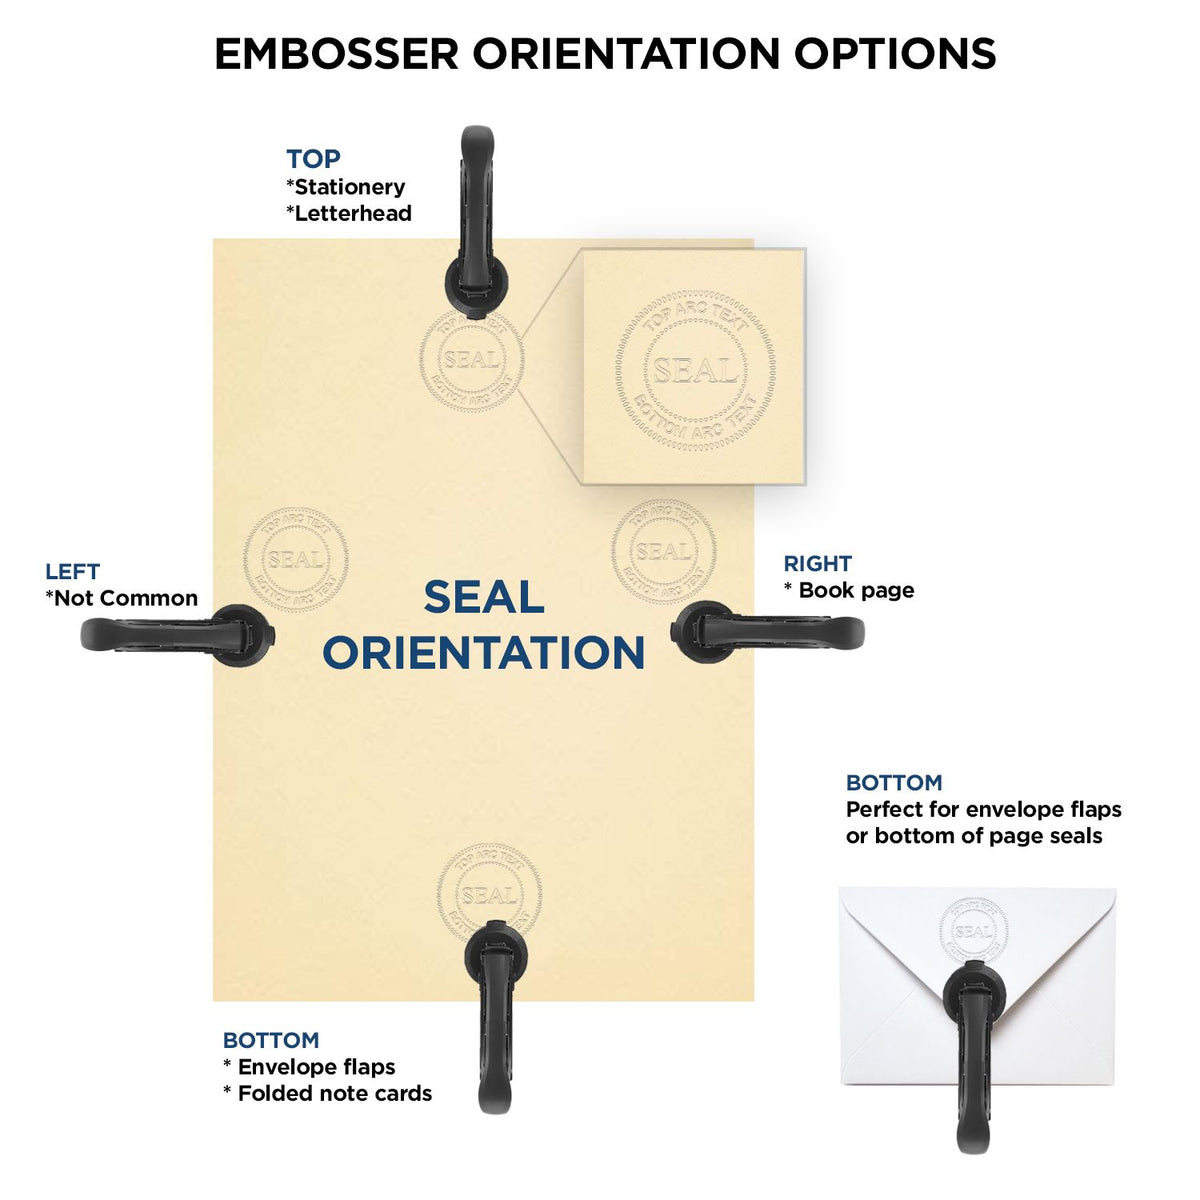 An infographic for the Gift Pennsylvania Engineer Seal showing embosser orientation, this is showing examples of a top, bottom, right and left insert.